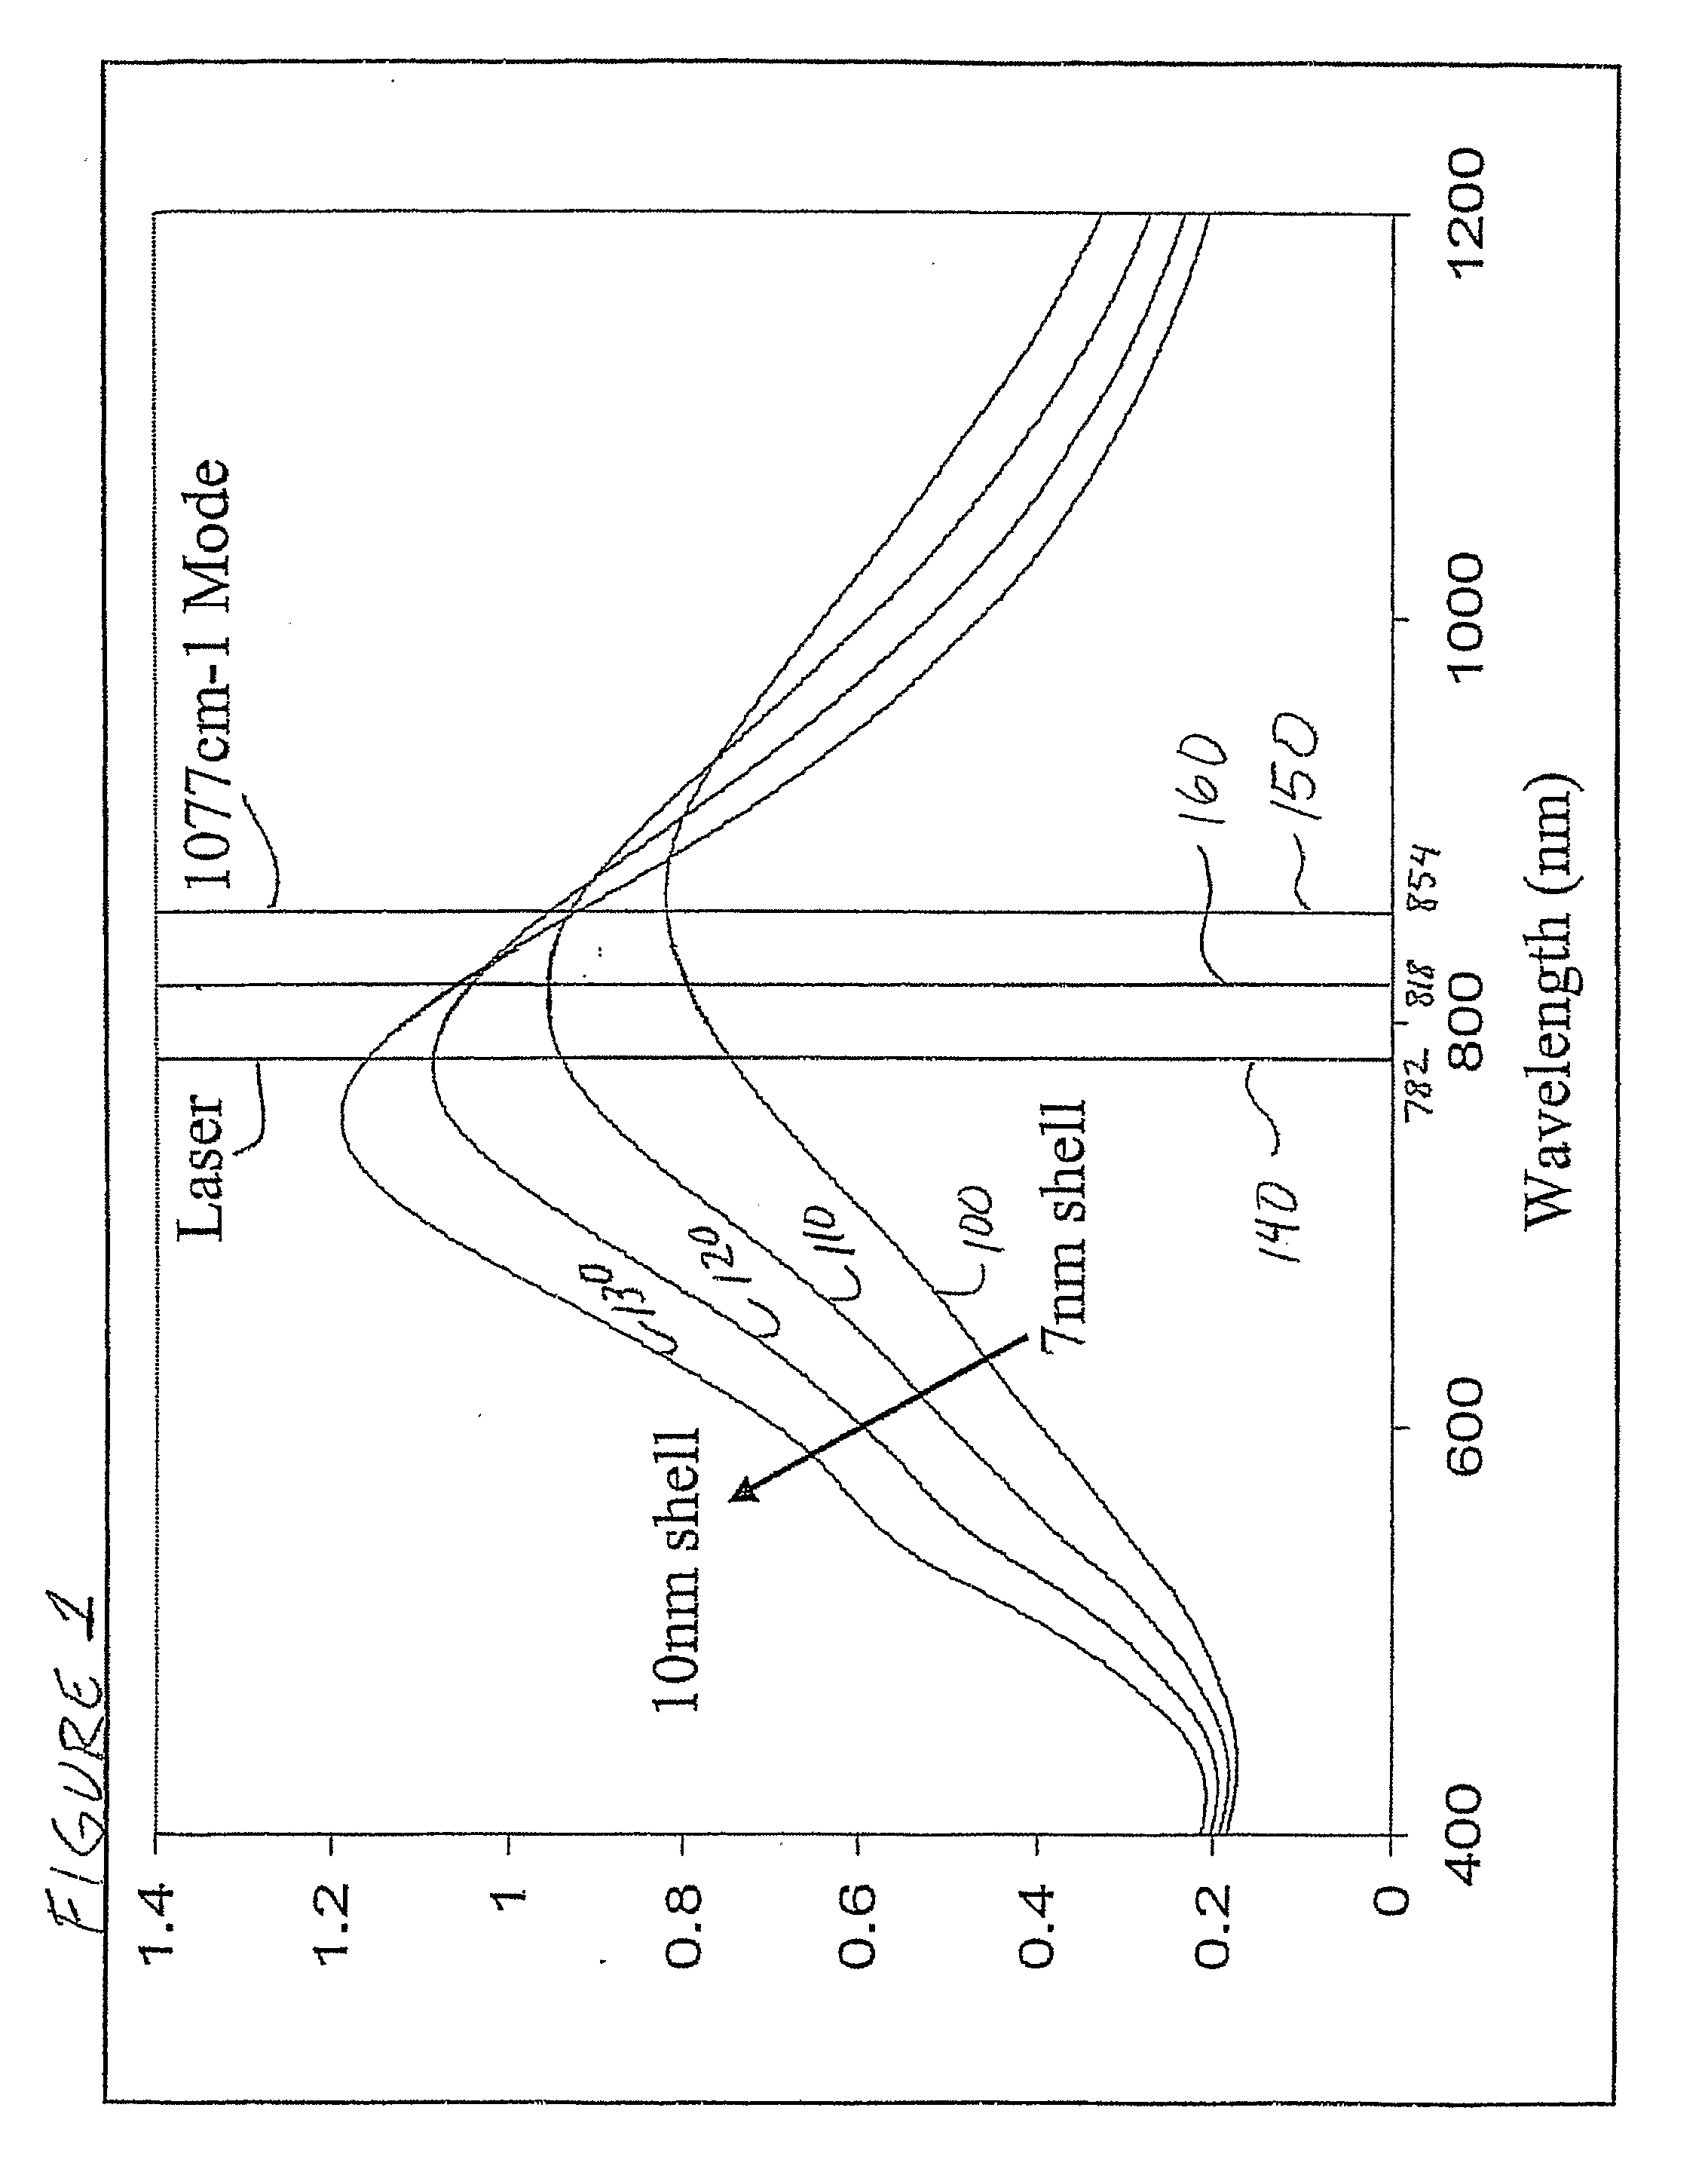 Method and System for Optimizing Surface Enhanced Raman Scattering